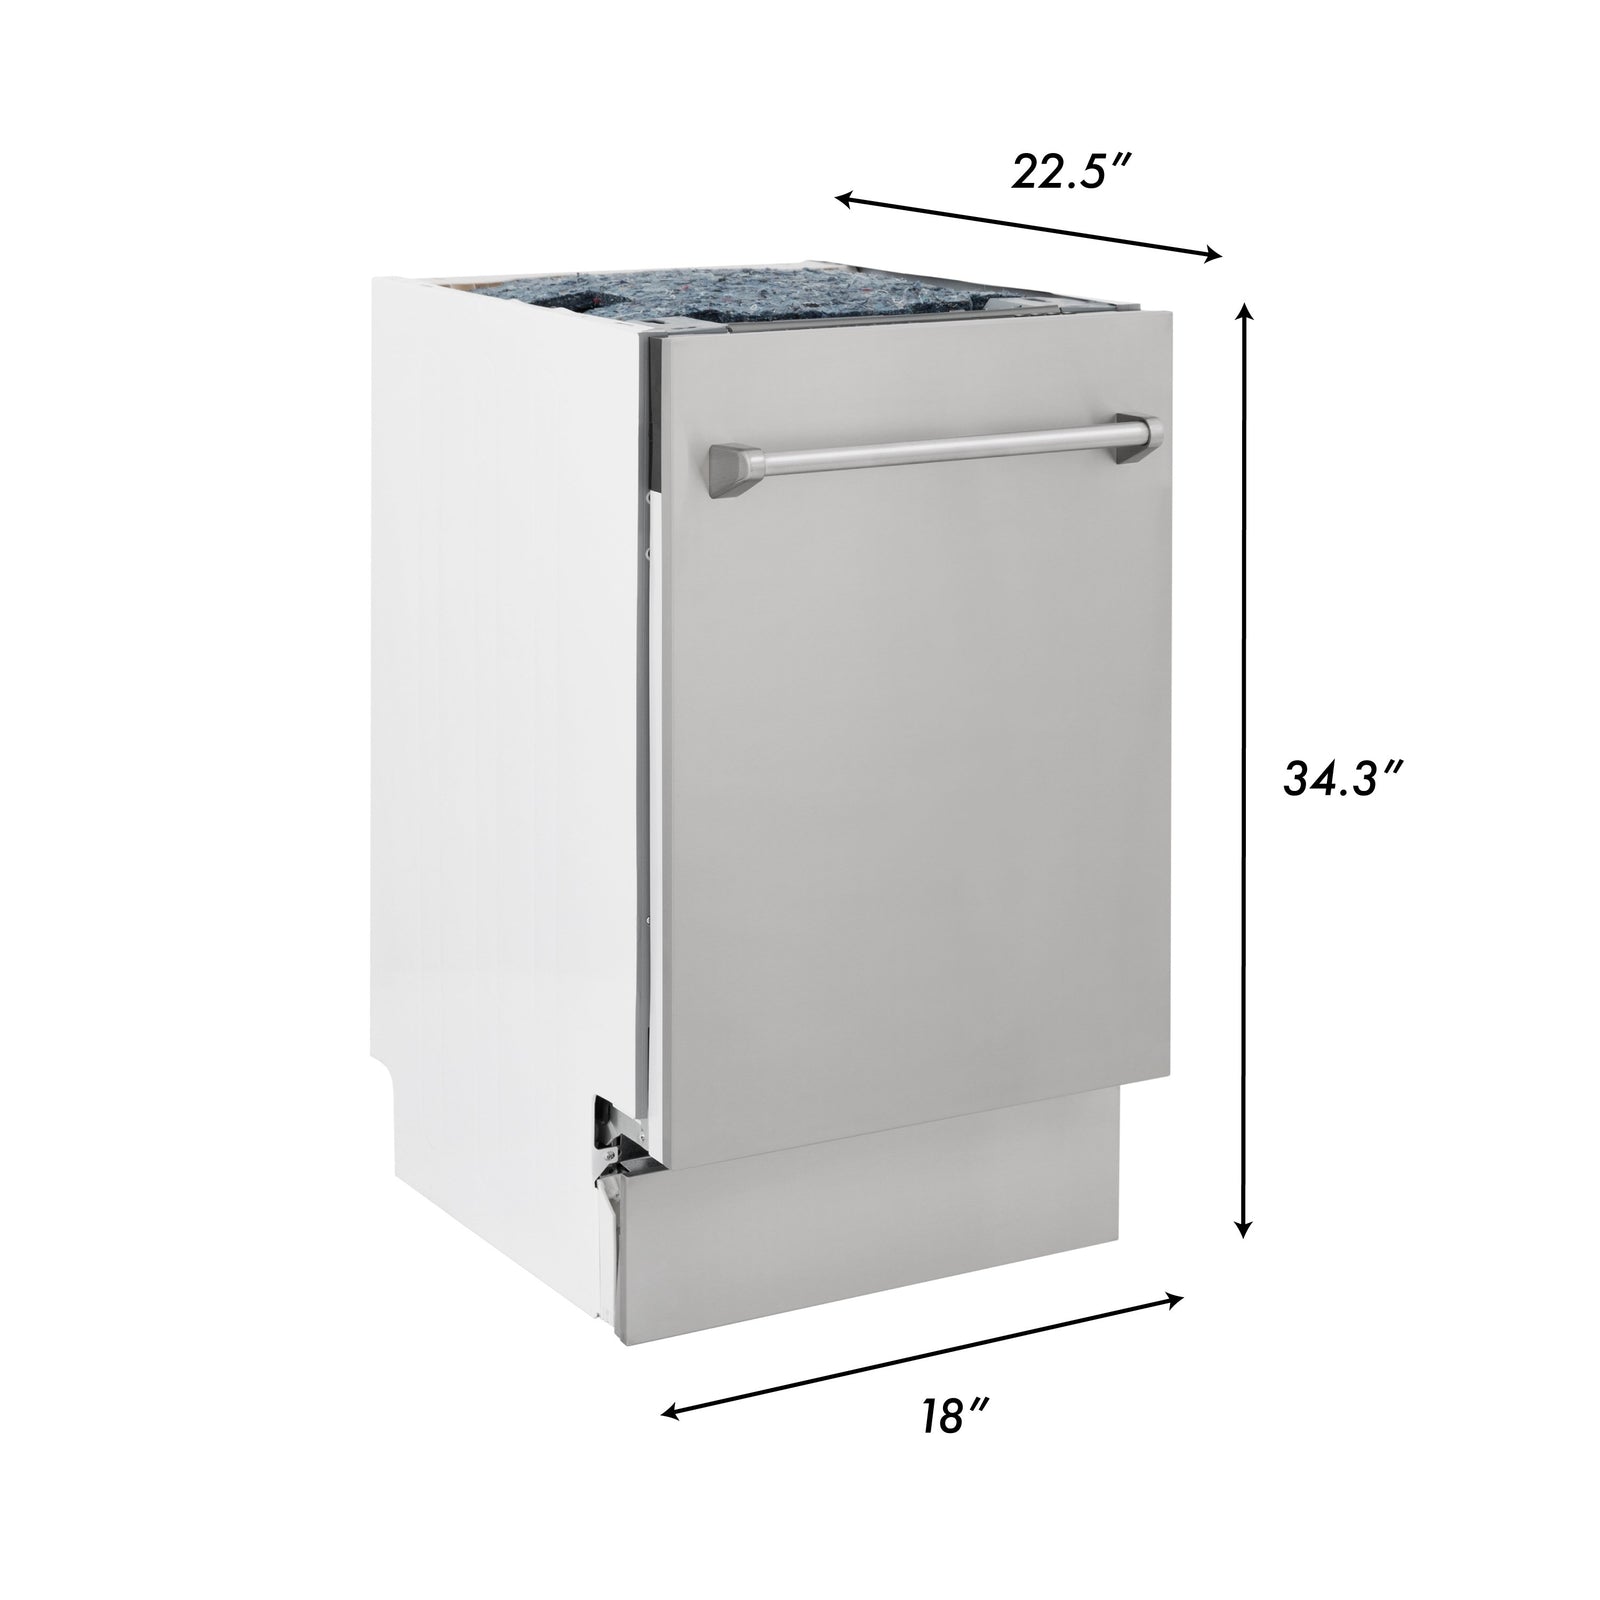 ZLINE 18 in. Top Control Tall Dishwasher in Stainless Steel with 3rd Rack, DWV-304-18 - Smart Kitchen Lab